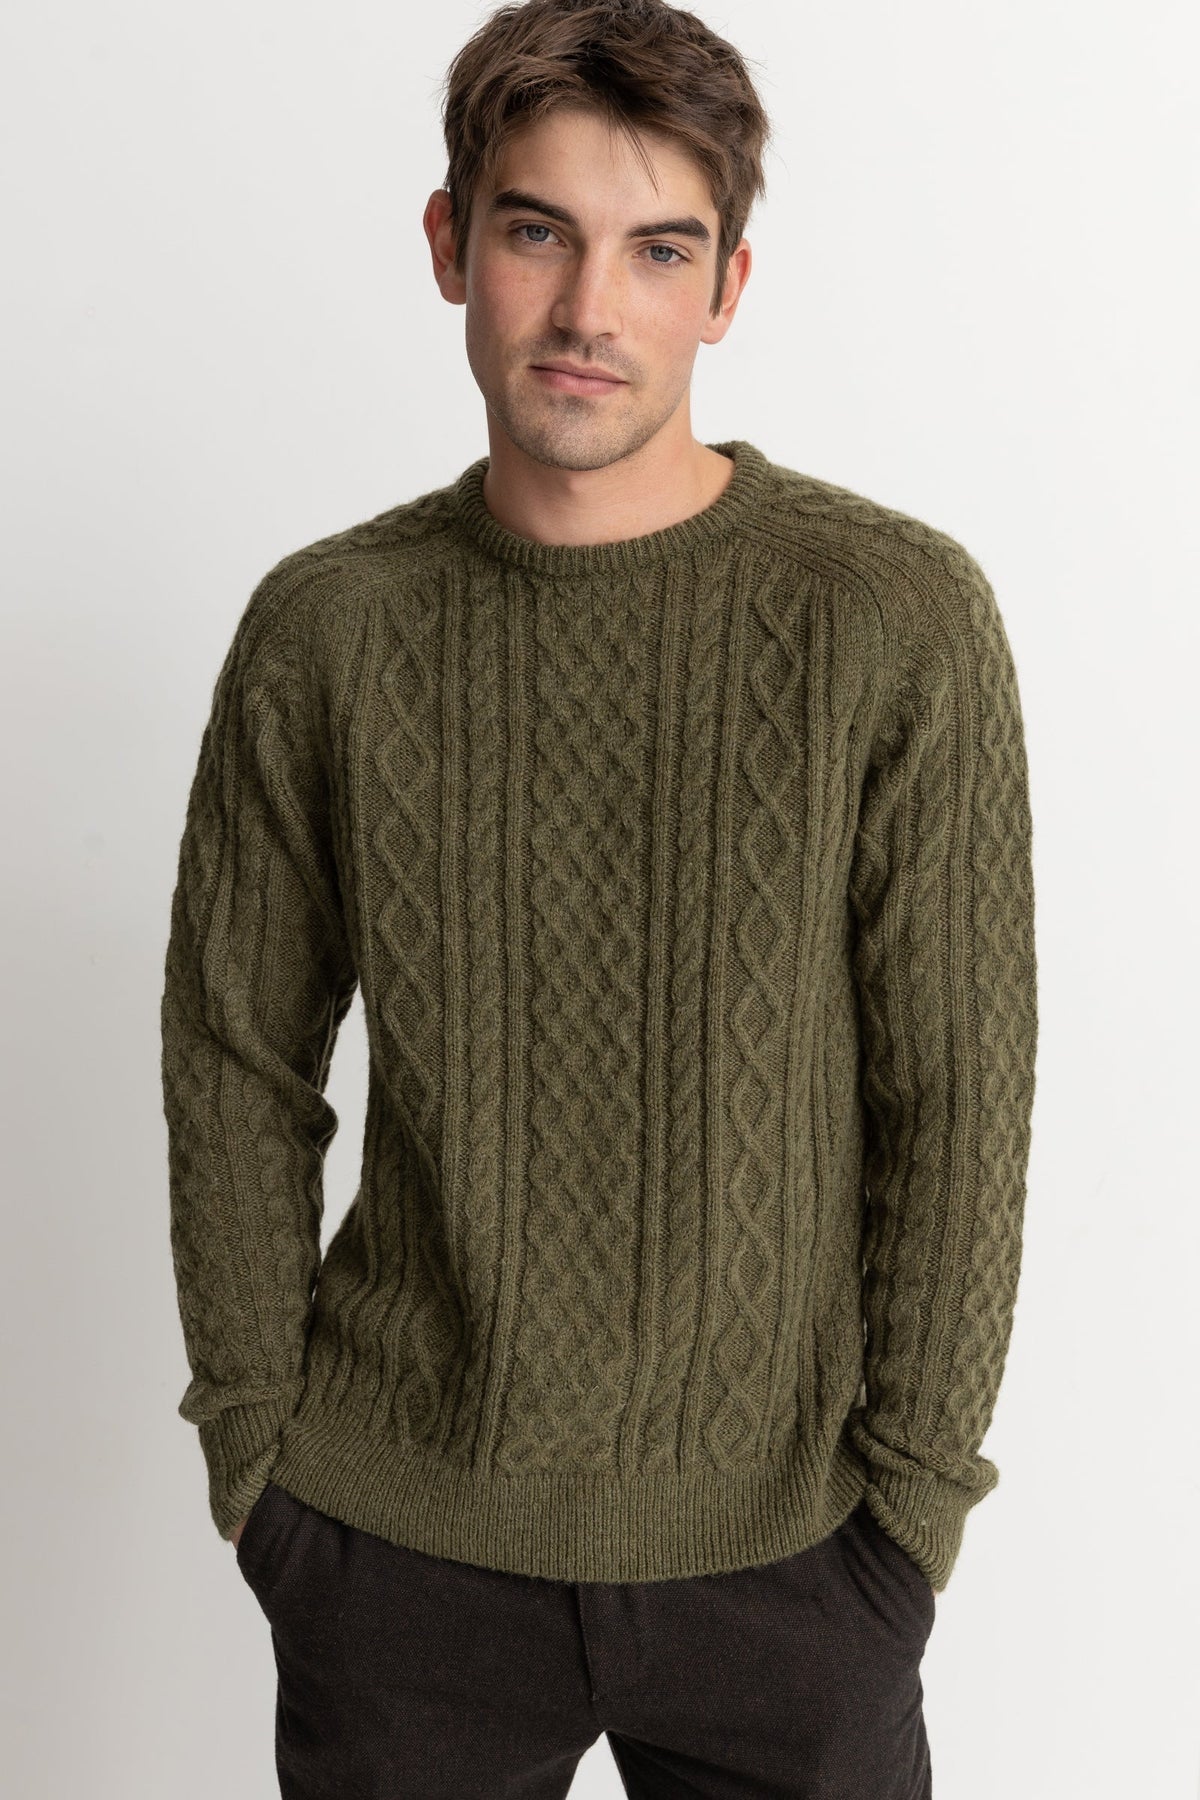 Mohair Fishermans Knit Sweater - OLIVE